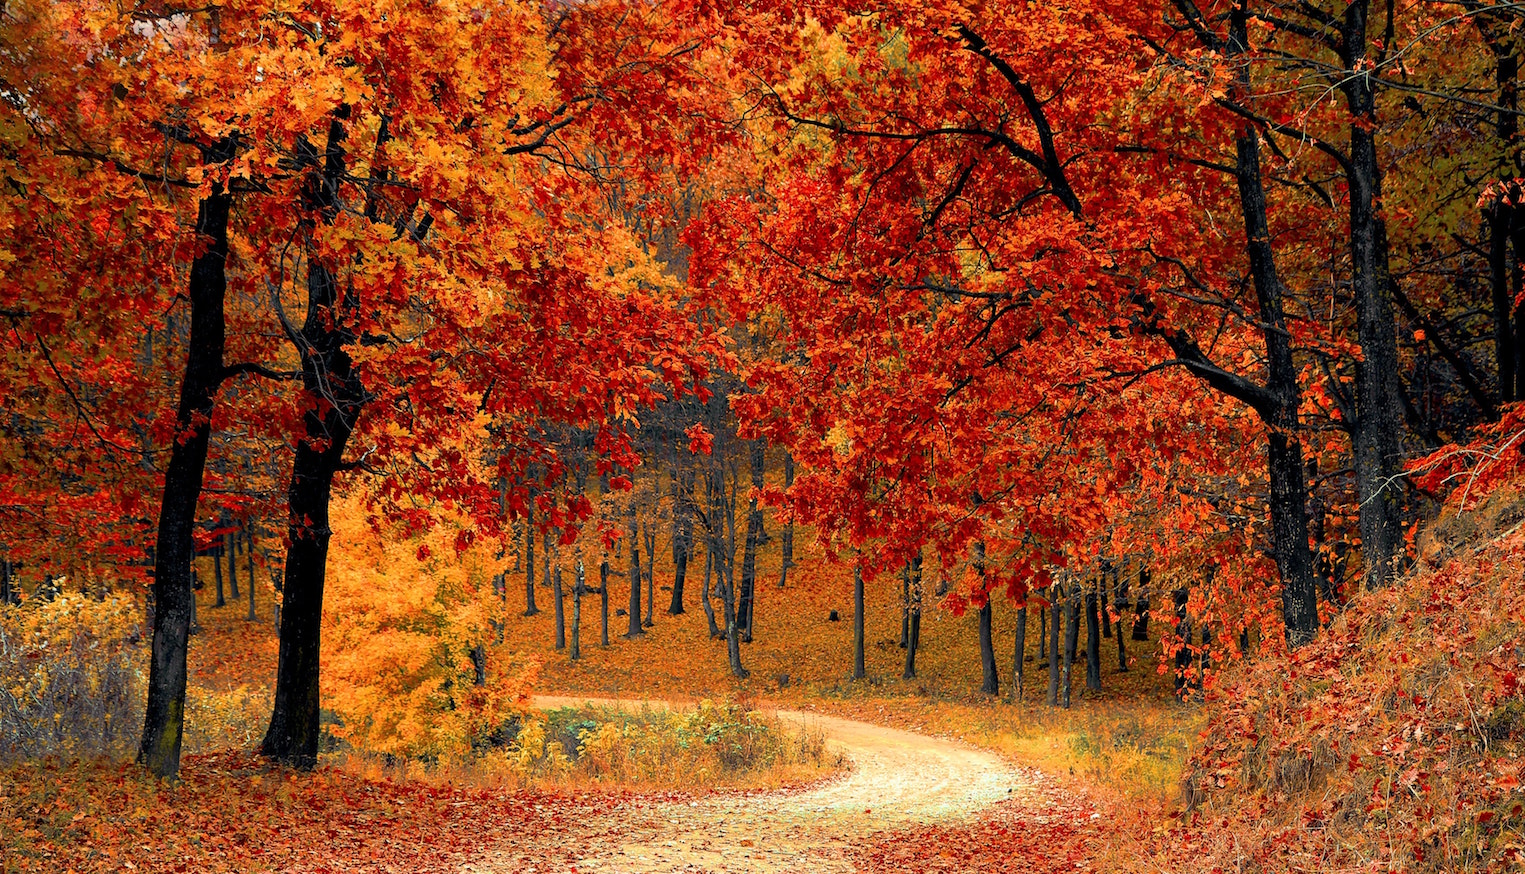 Fall festival colors | Outdoorsy RV Rental Marketplace